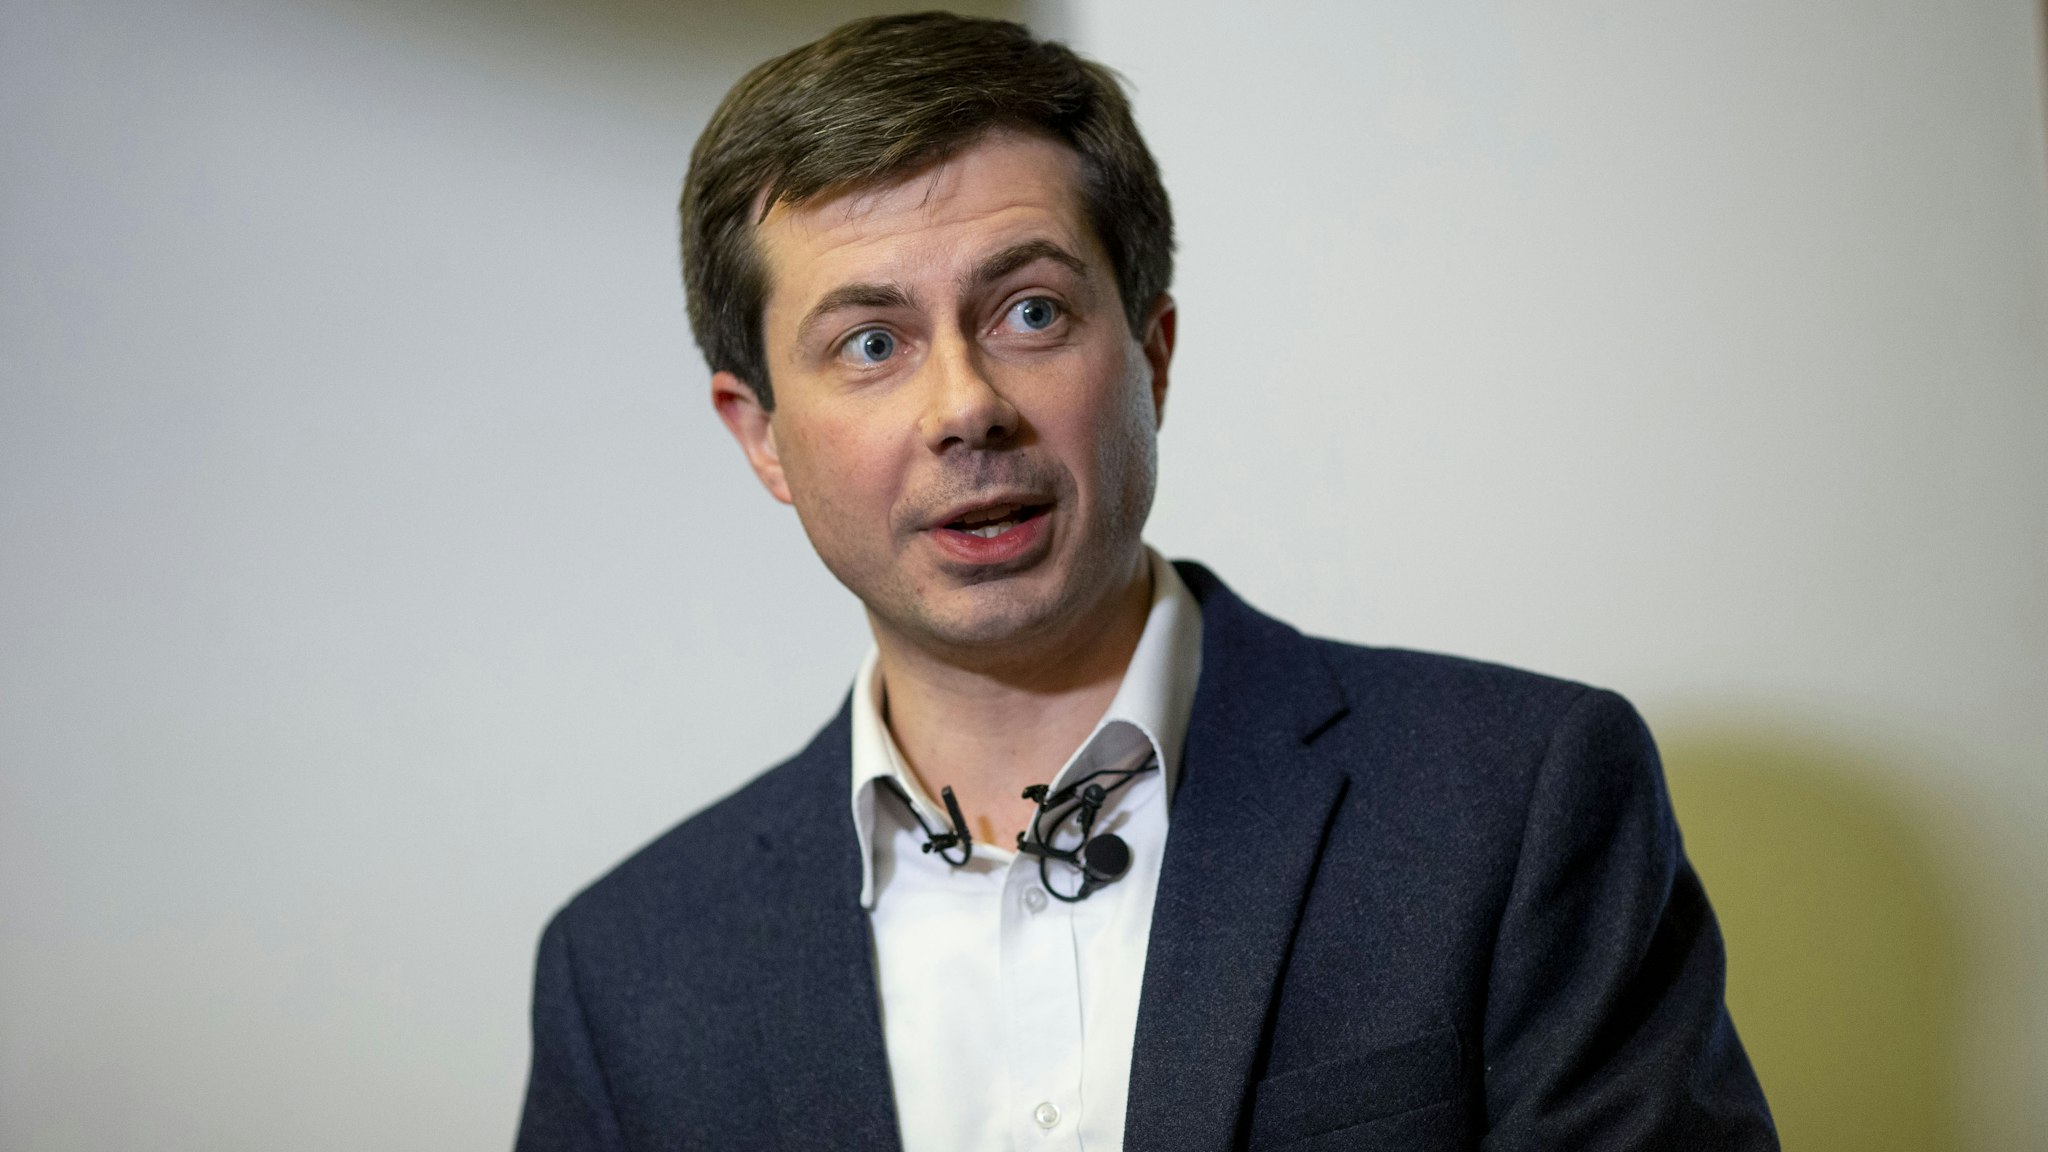 Pete Buttigieg, the mayor of South Bend, Indiana, speaks during a campaign stop in Ankeny, Iowa, U.S., on Friday, Feb. 8, 2019. A flurry of proposals to slap new taxes on the ultra-wealthy, extend Medicare to all Americans and make college debt-free reflect a rapidly changing Democratic Party that sees a sharp left turn as the path to defeating President Donald Trump.